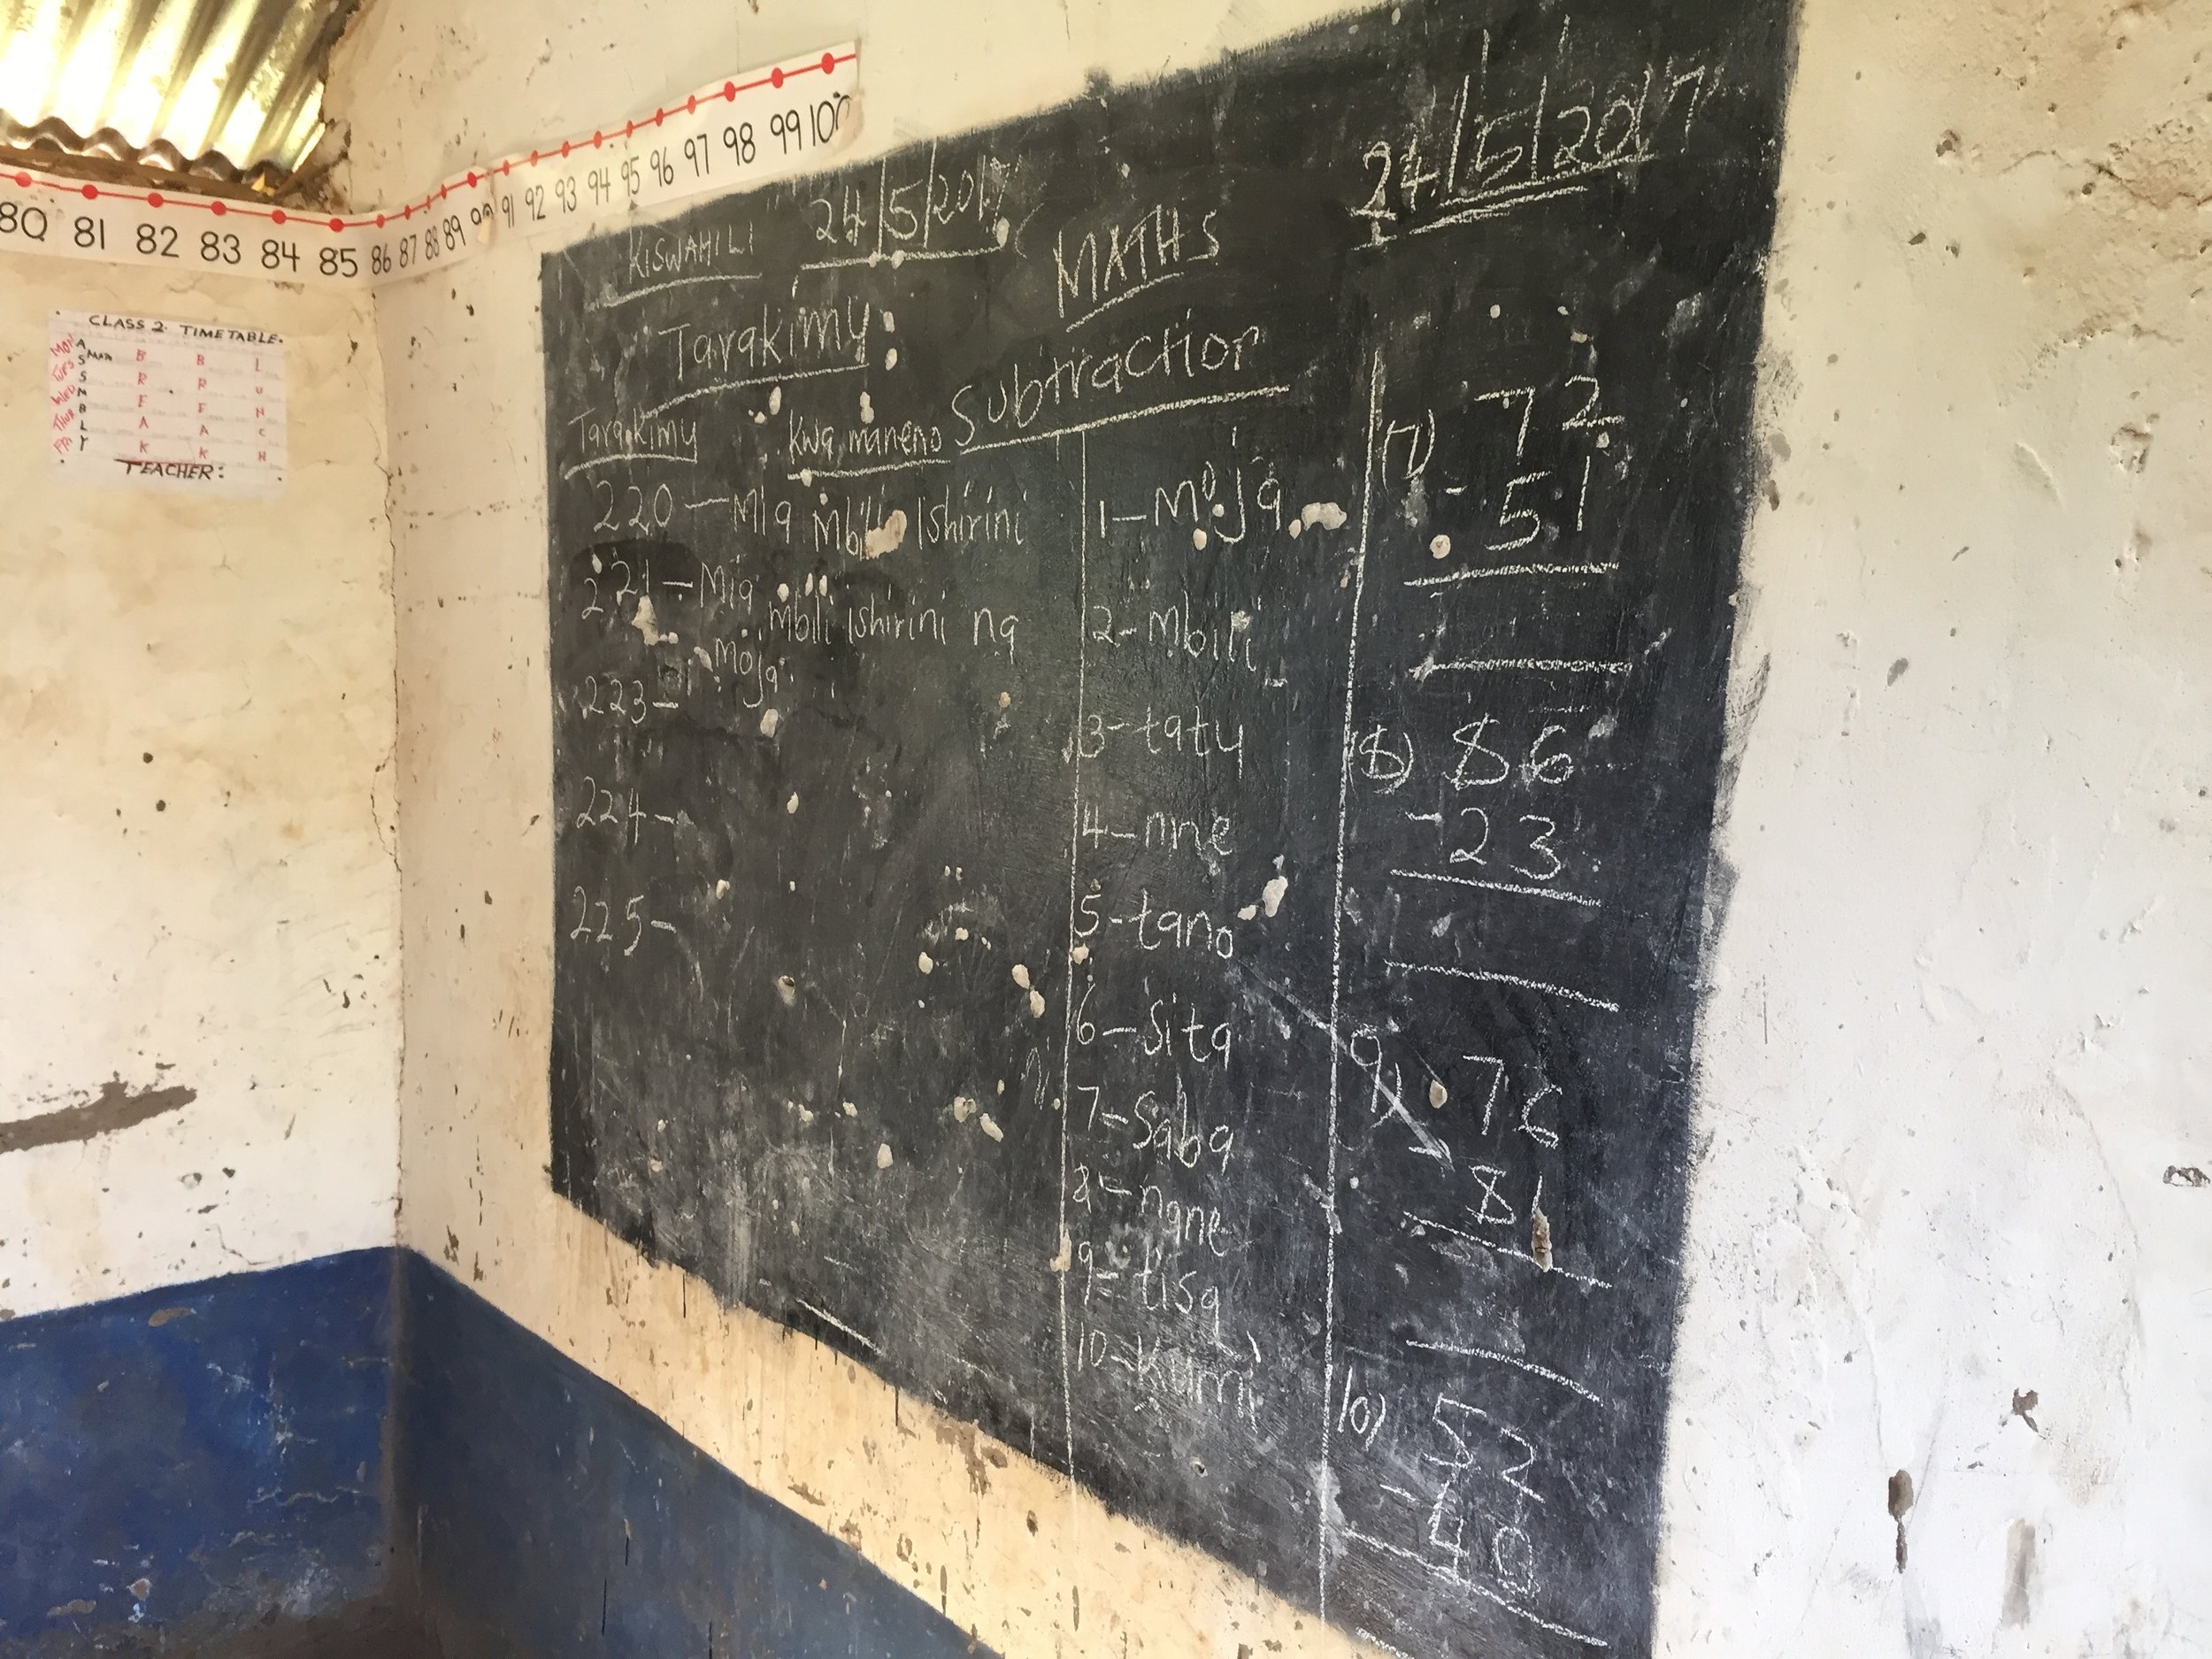  This class was doing a subtraction lesson where they were subtracting 2 digit numerals from each other. The chalkboard was black paint on a wall that had many holes in it. The teachers would write their lessons around the holes for the students. 